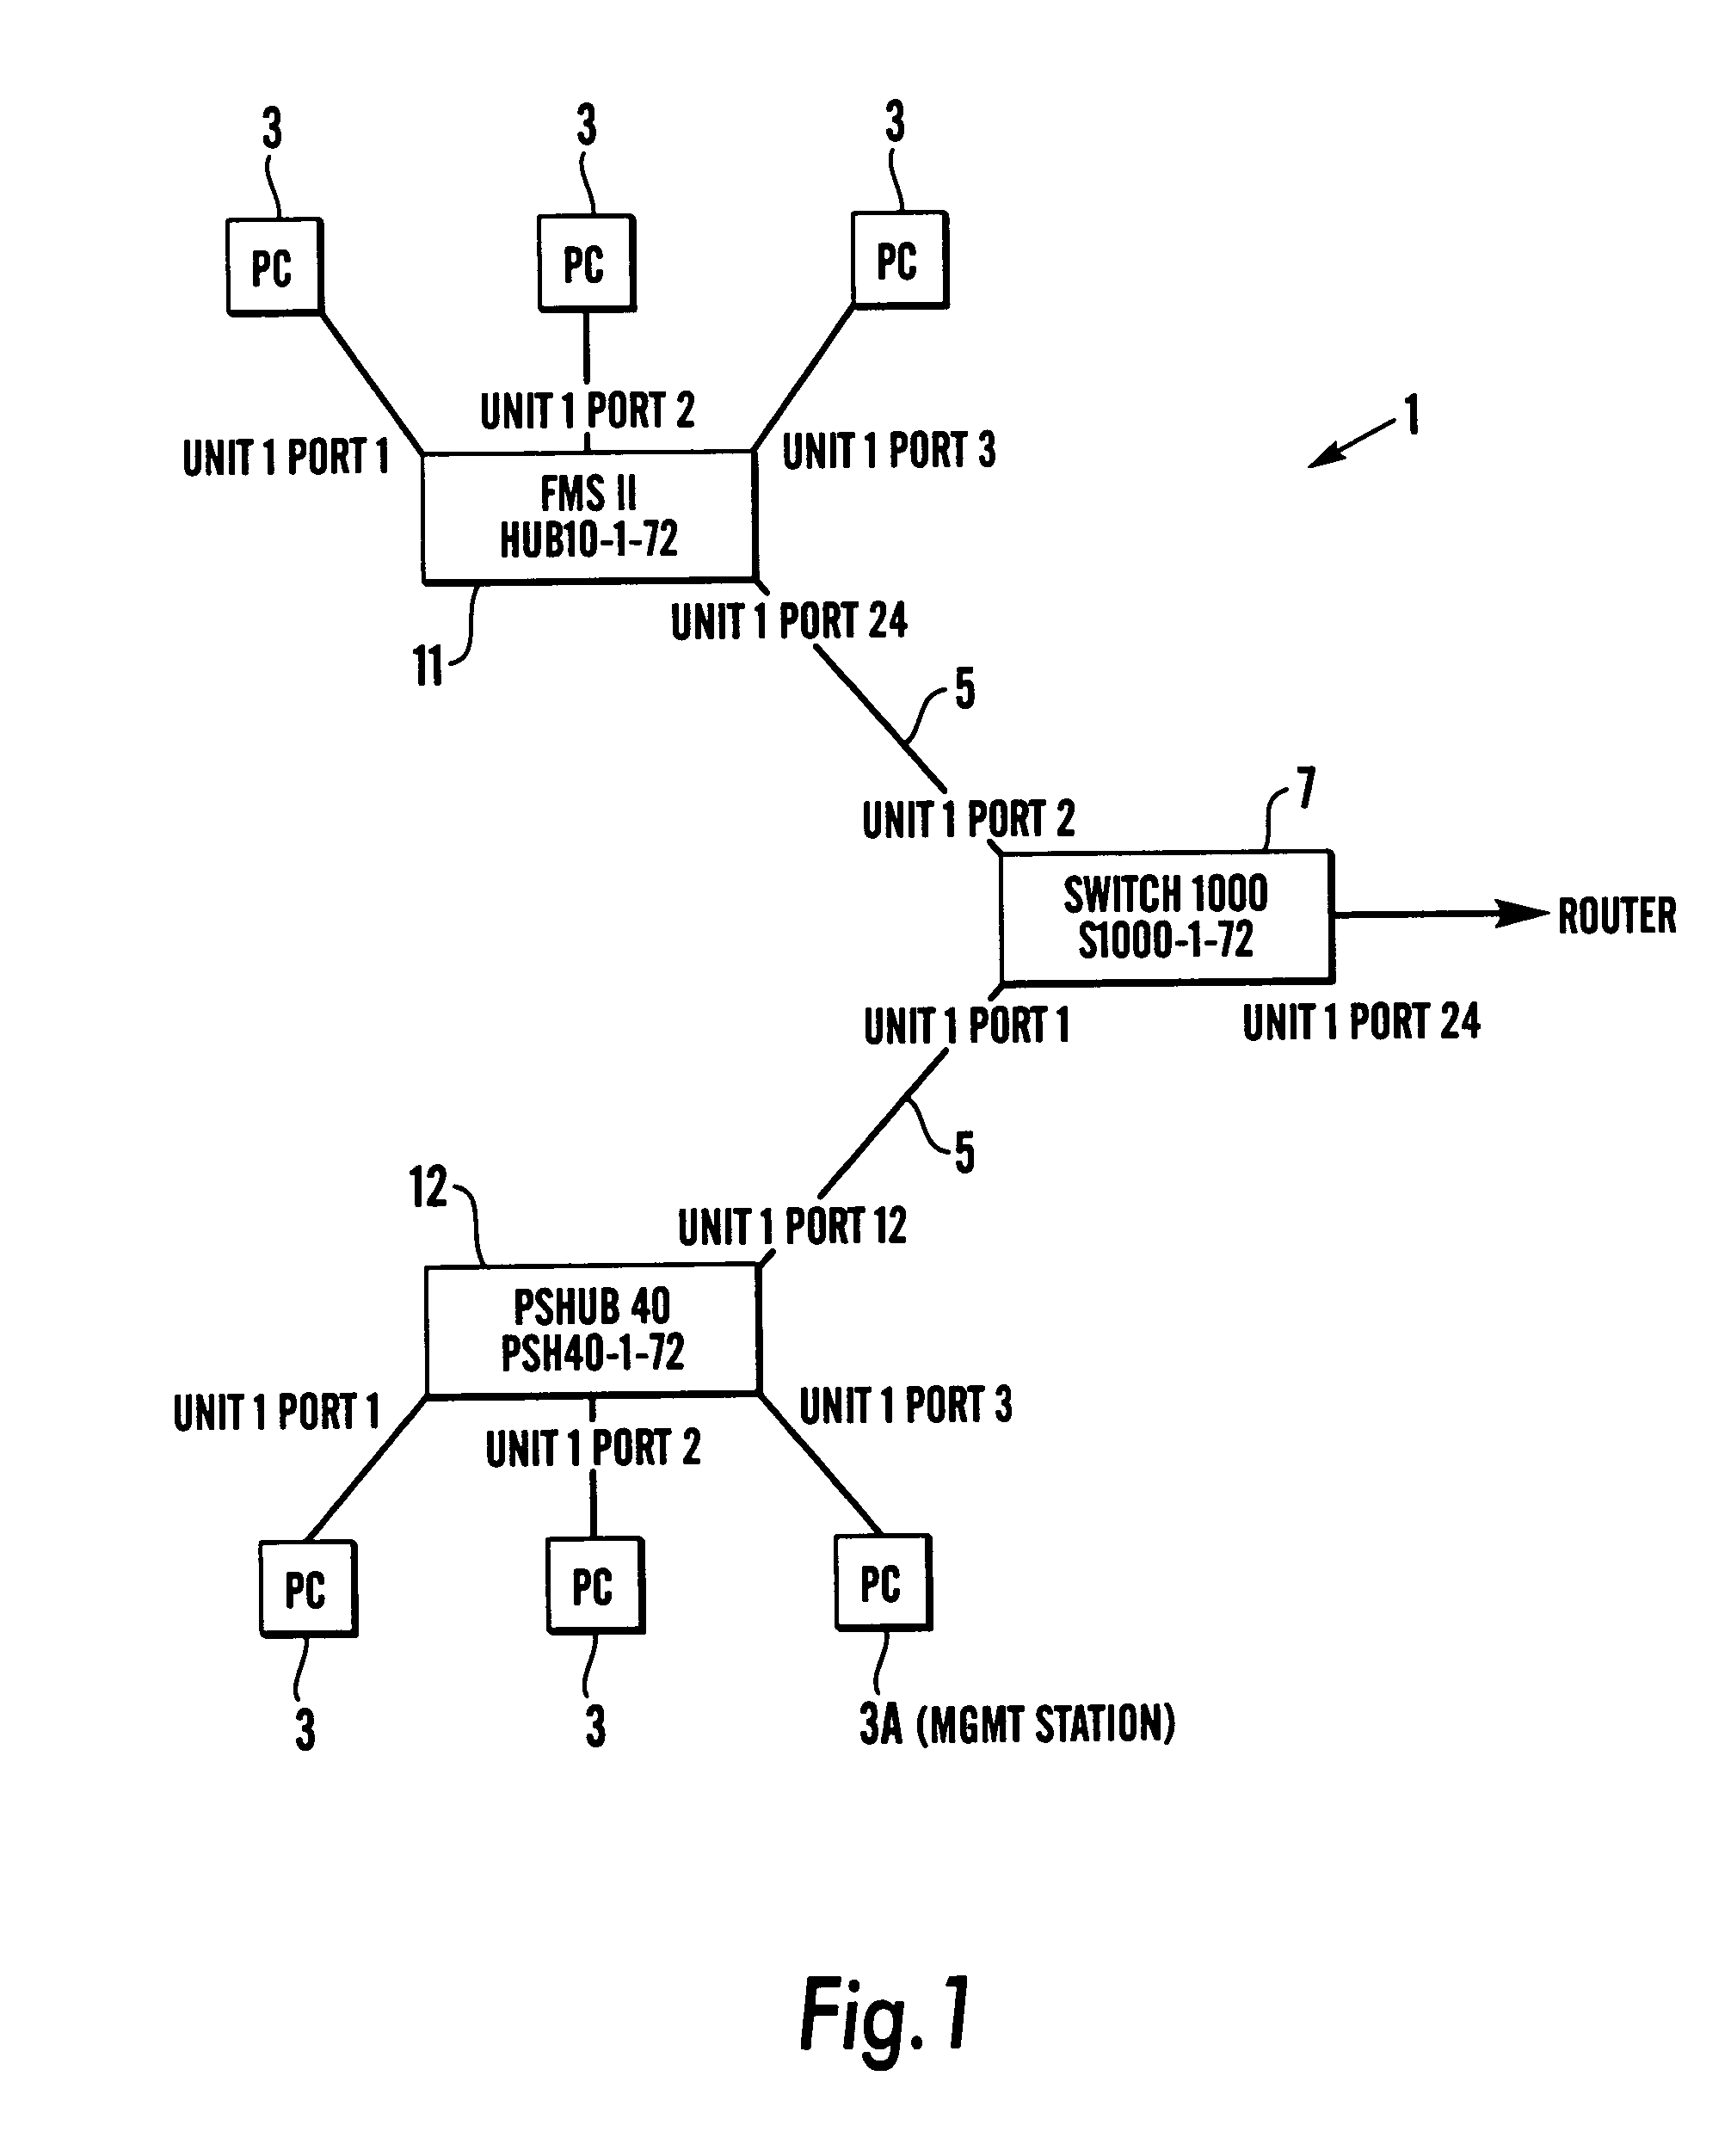 Apparatus and method for processing data relating to events on a network